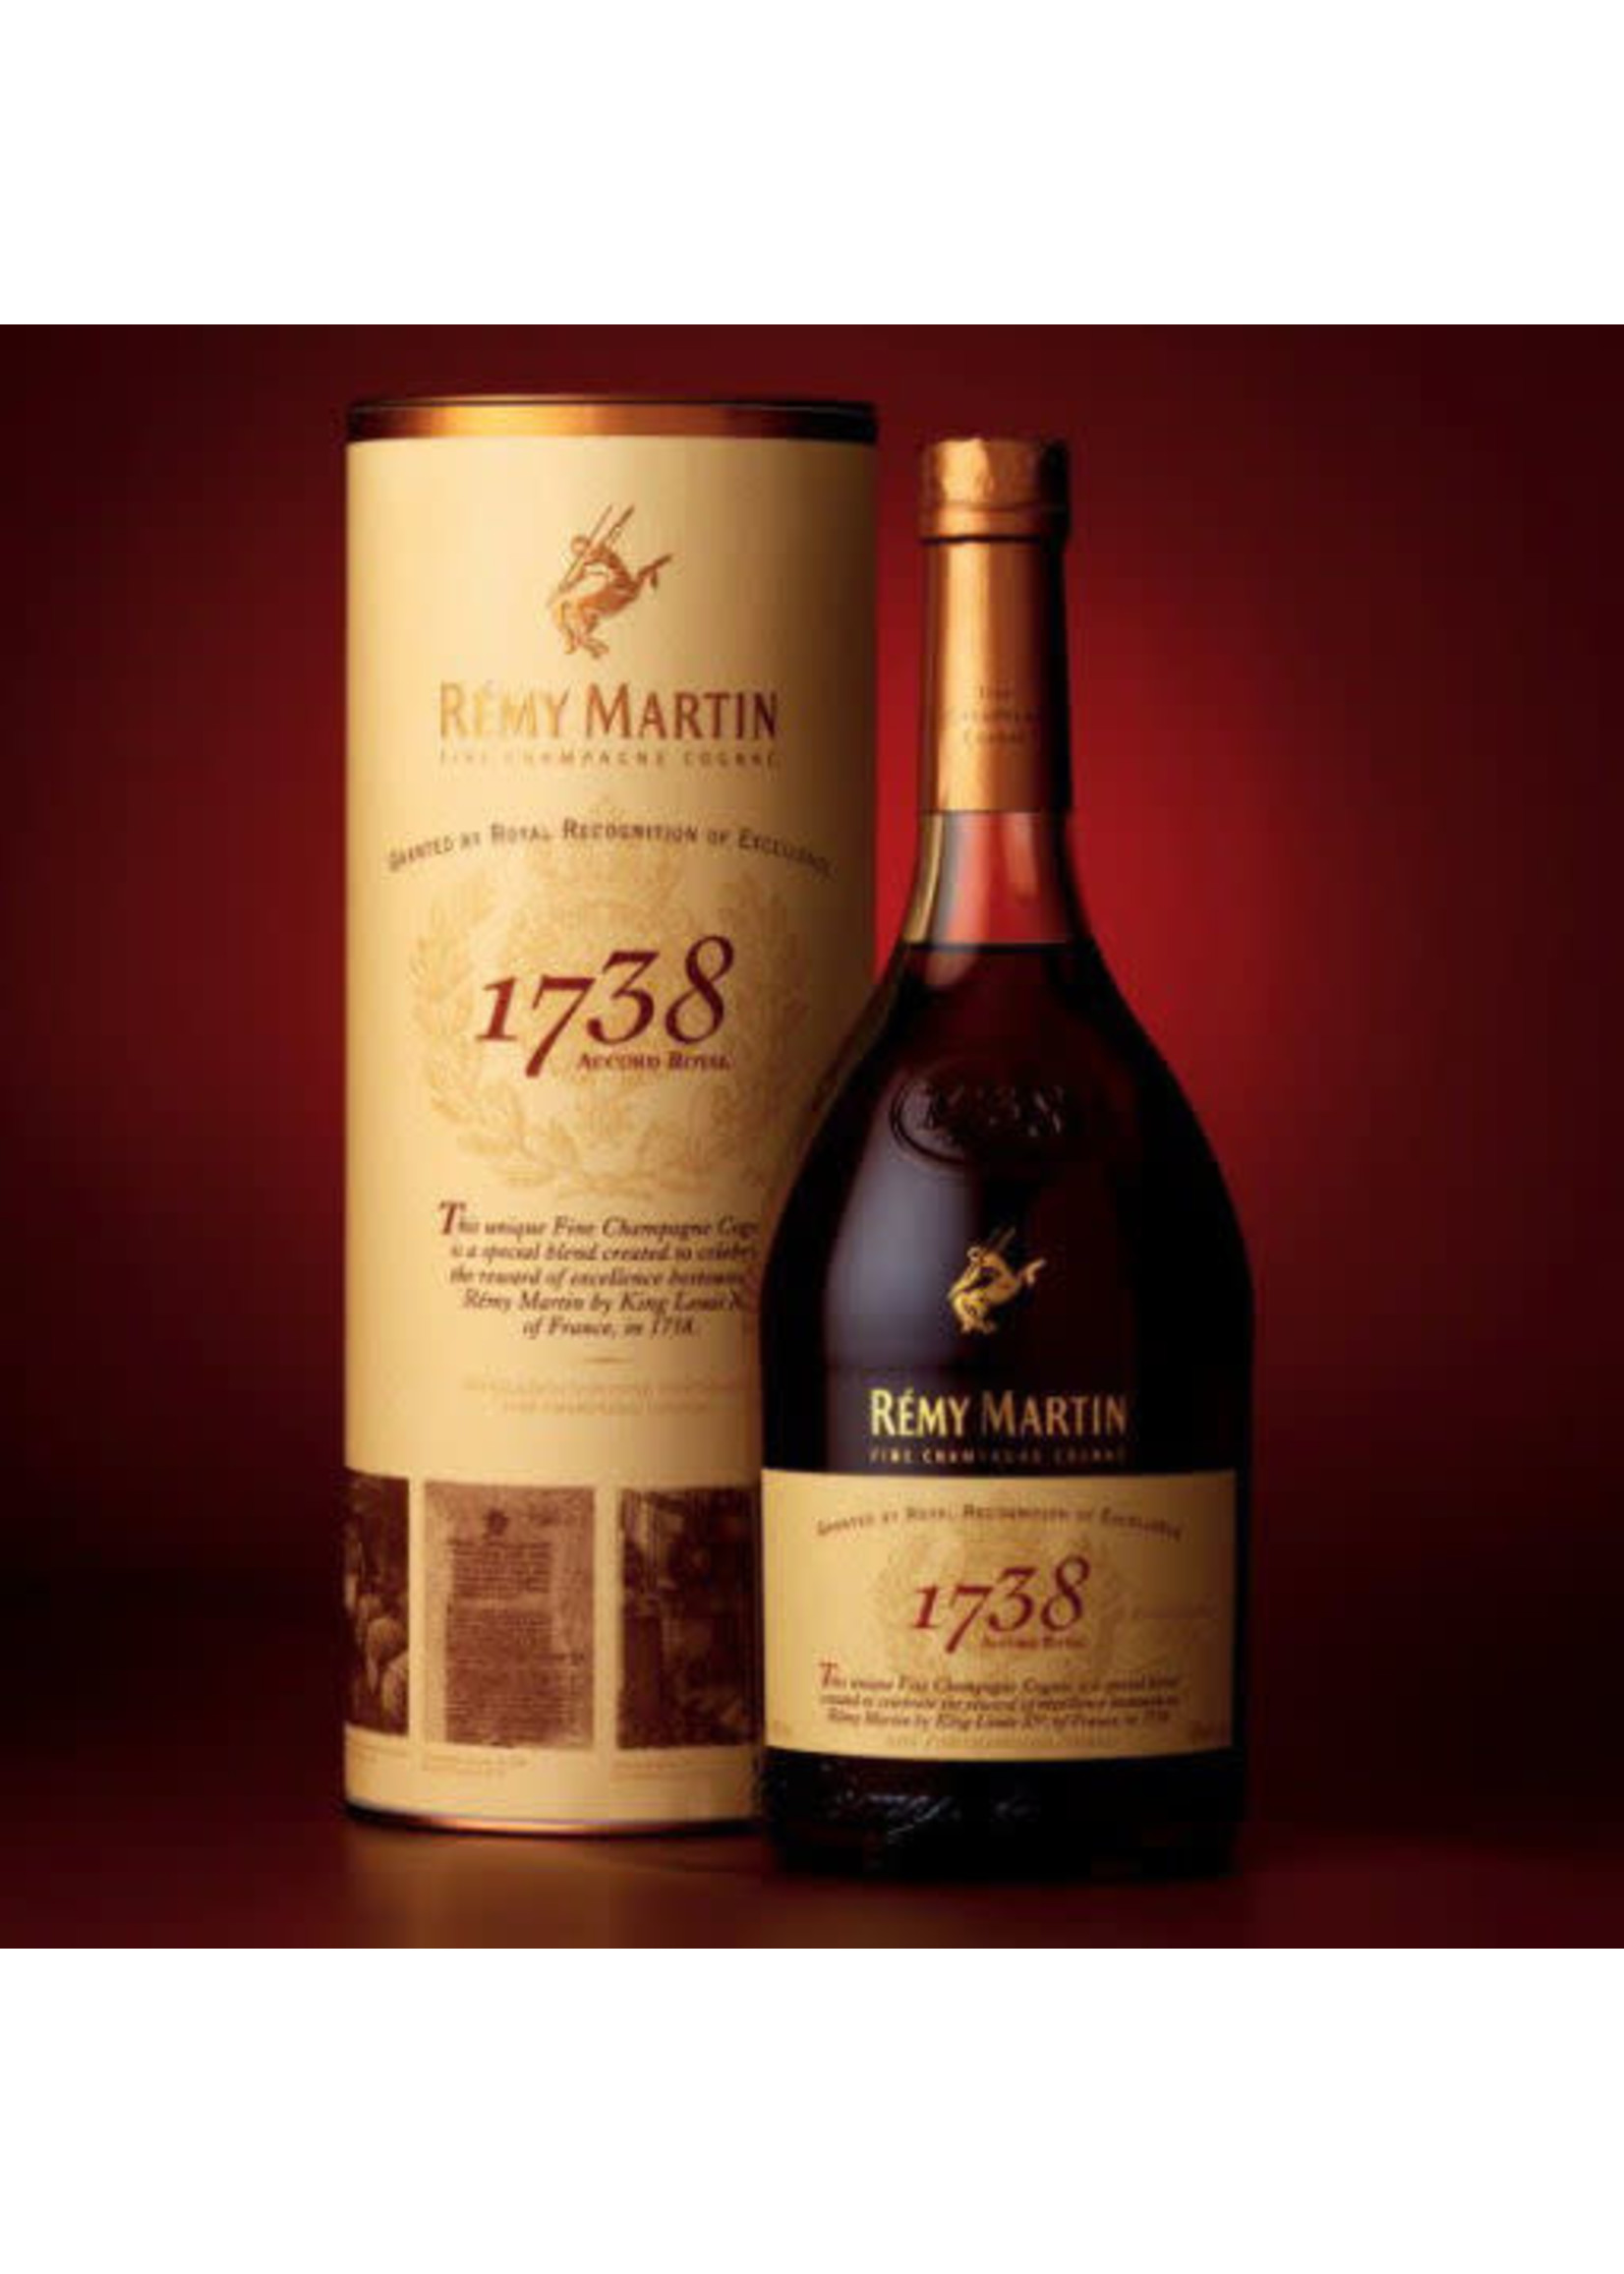 Remy Martin 1738 80Proof 750ml